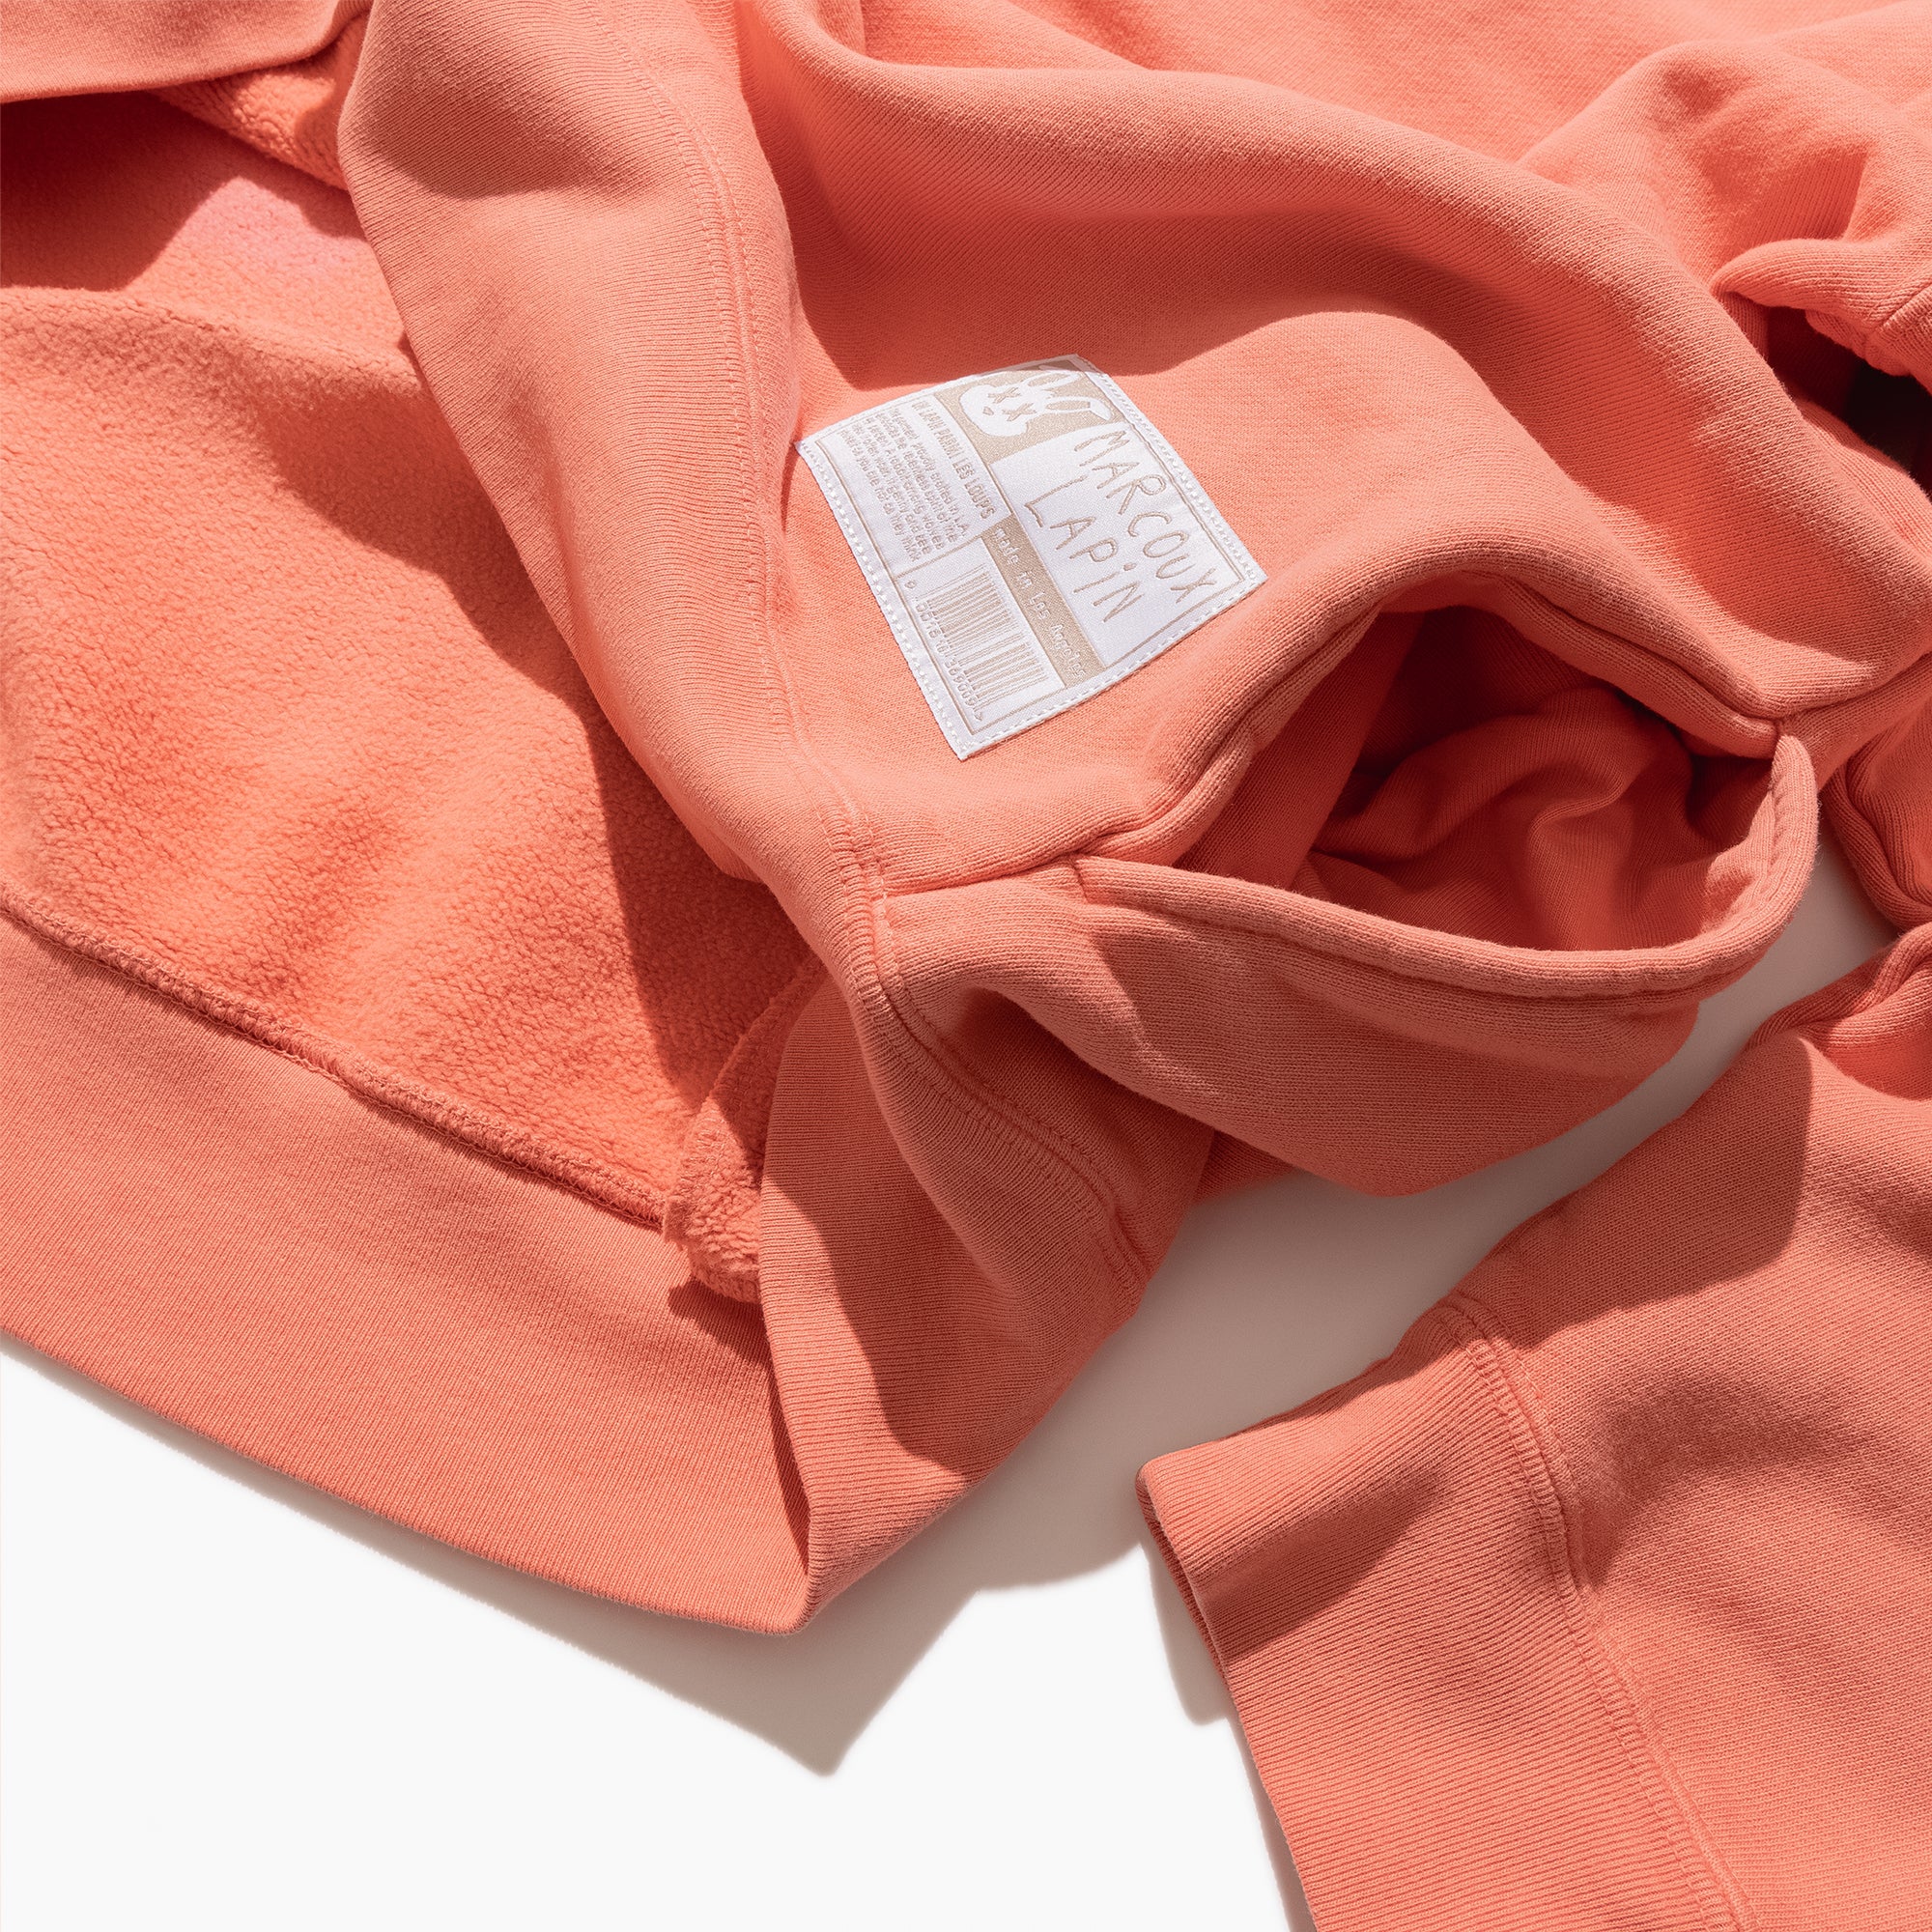 Marcoux Lapin Originals Sweatshirt with side-pockets (Peach)